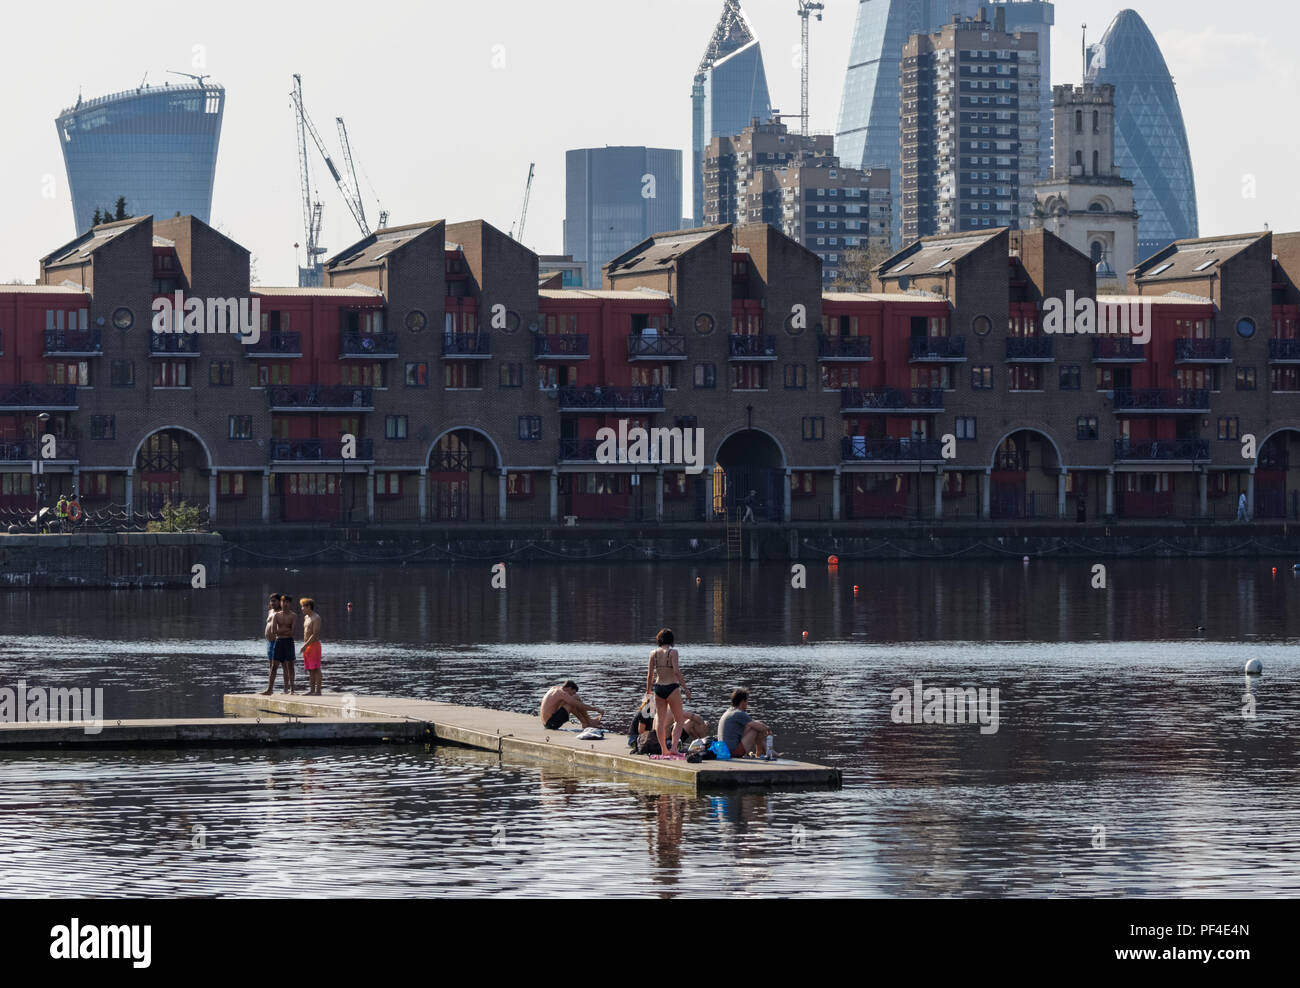 Residential buildings at Shadwell Basin with the city of London skyscrapers in the background, England United Kingdom UK Stock Photo